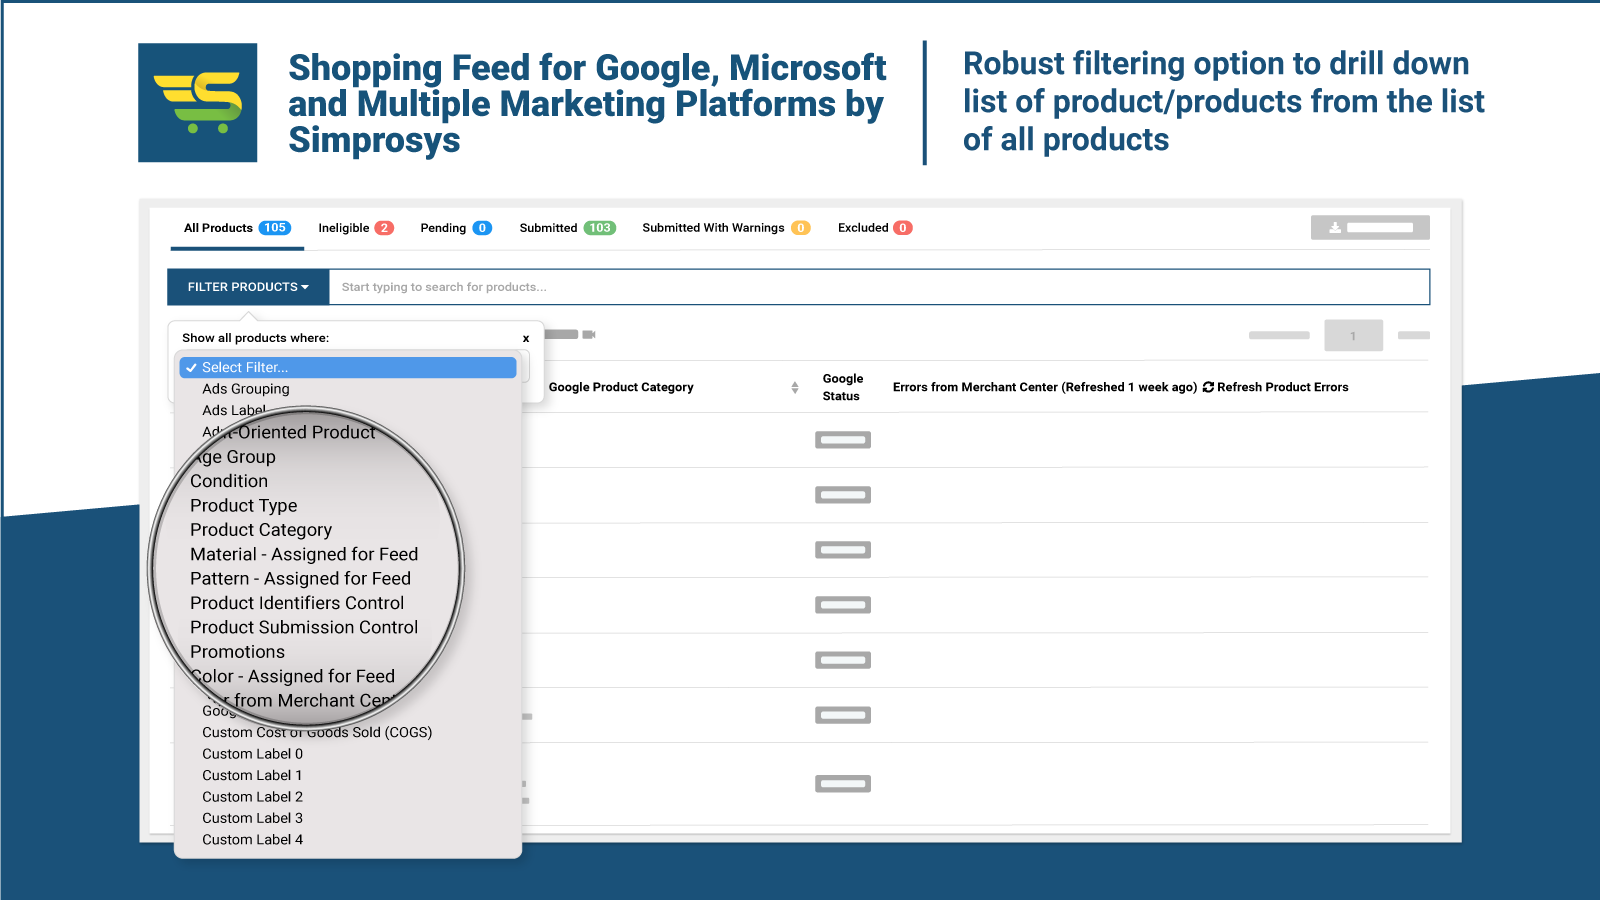 Easier filtering options helpful to list out products